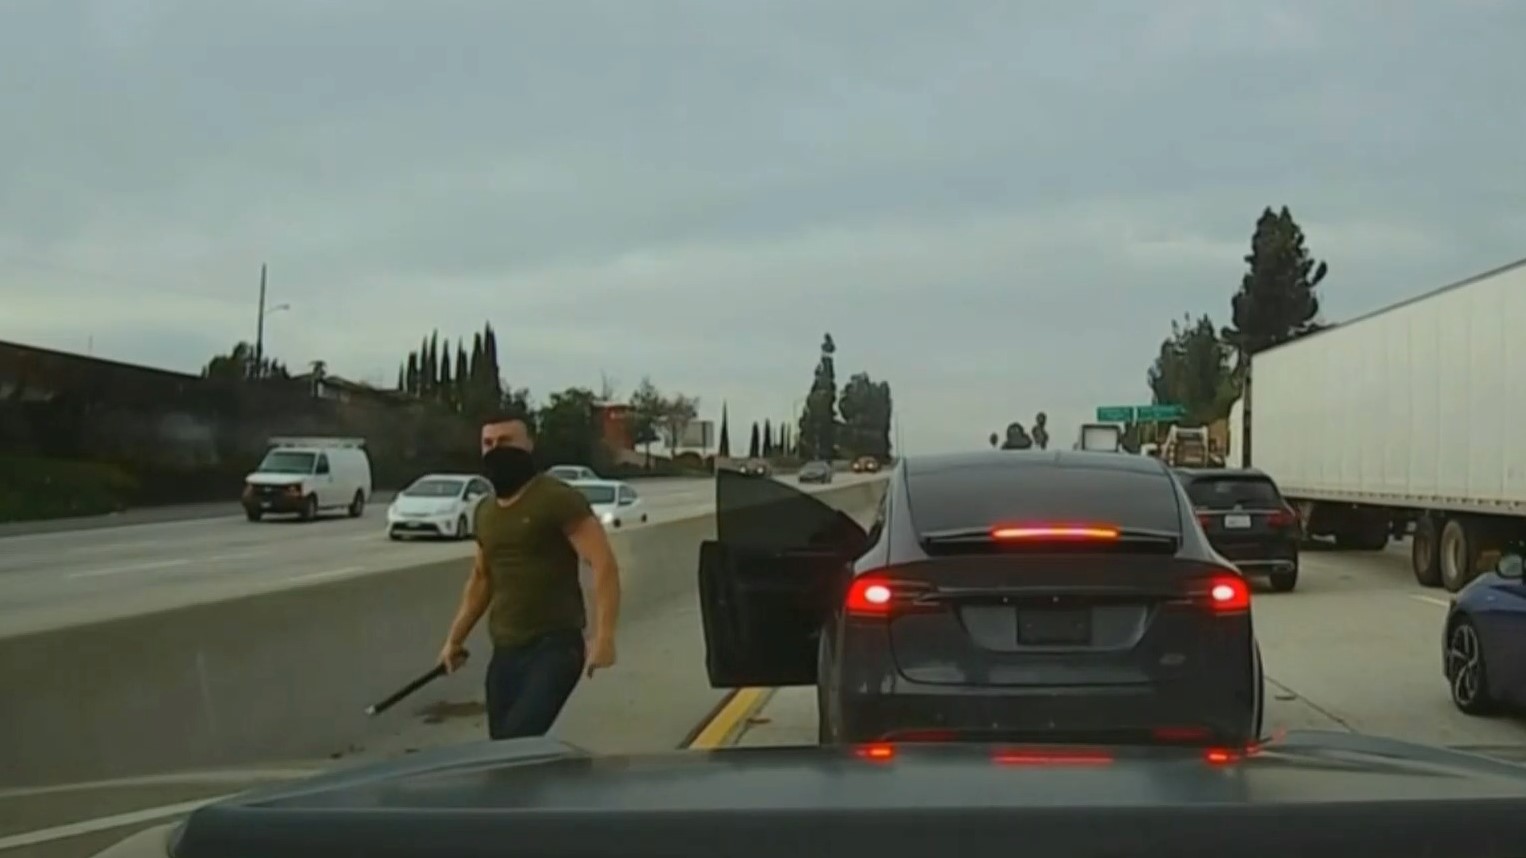 Baton-Wielding Driver Stops Tesla on California Freeway in Violent Confrontation Caught on Dashcam